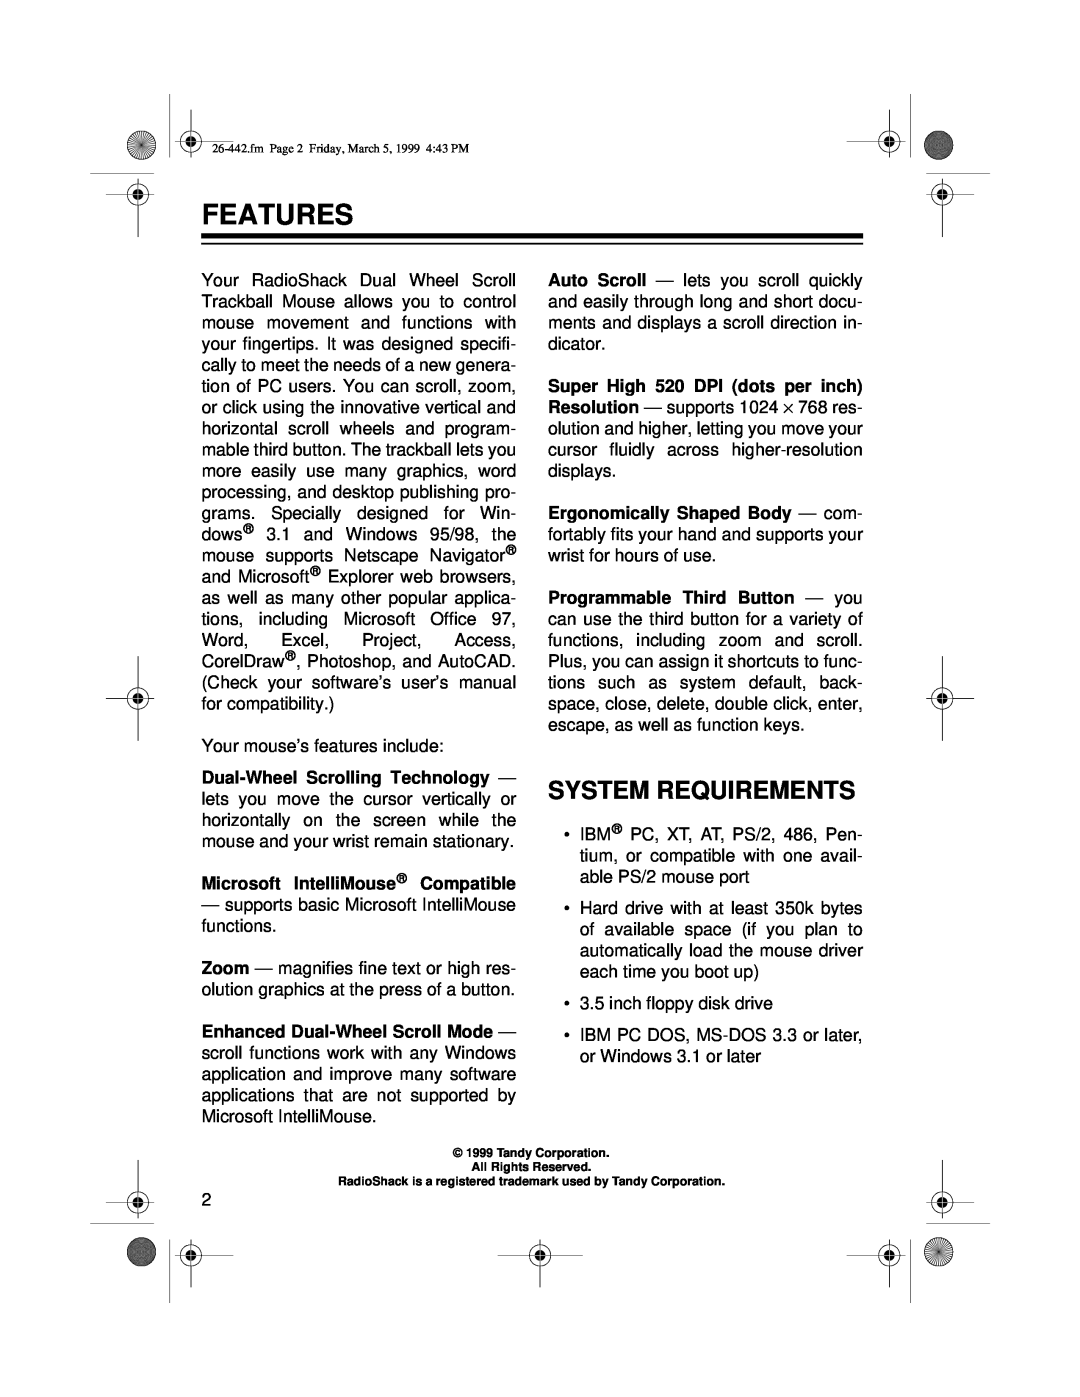 Radio Shack 26-442 owner manual Features, System Requirements 